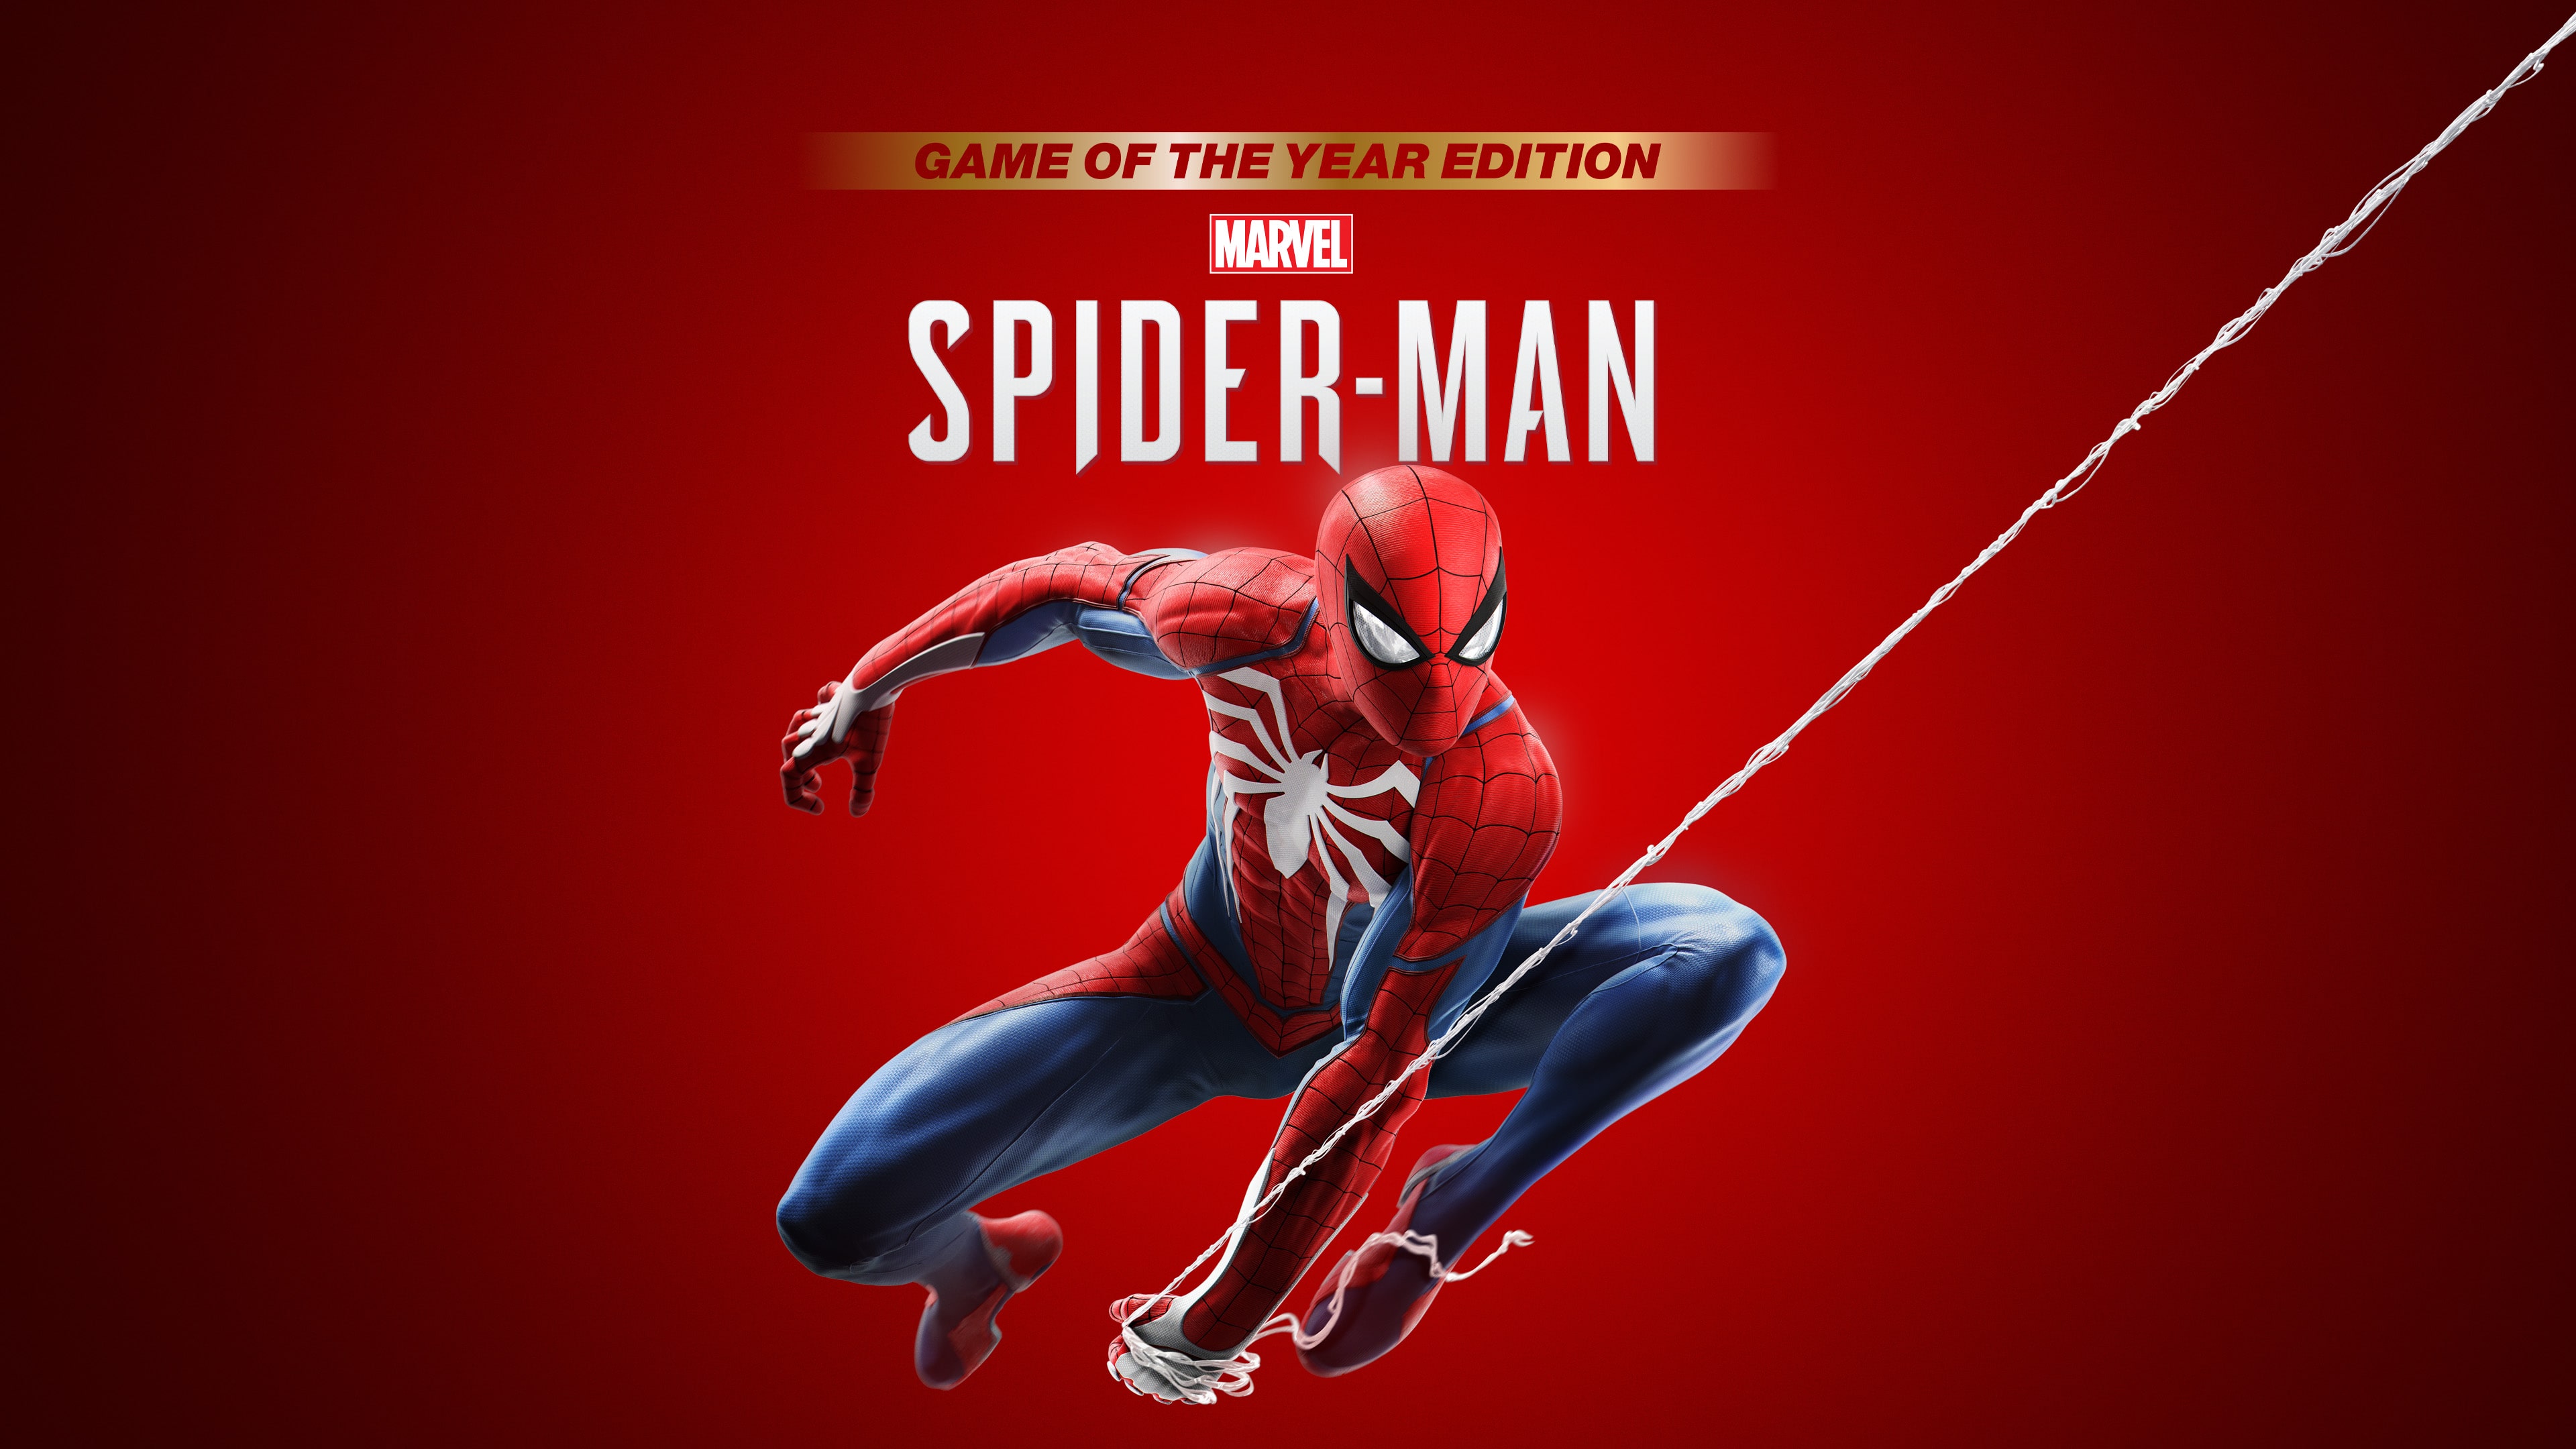 Marvel's Spider-Man Game Of The Year Edition (한국어, 영어, 중국어(번체자))